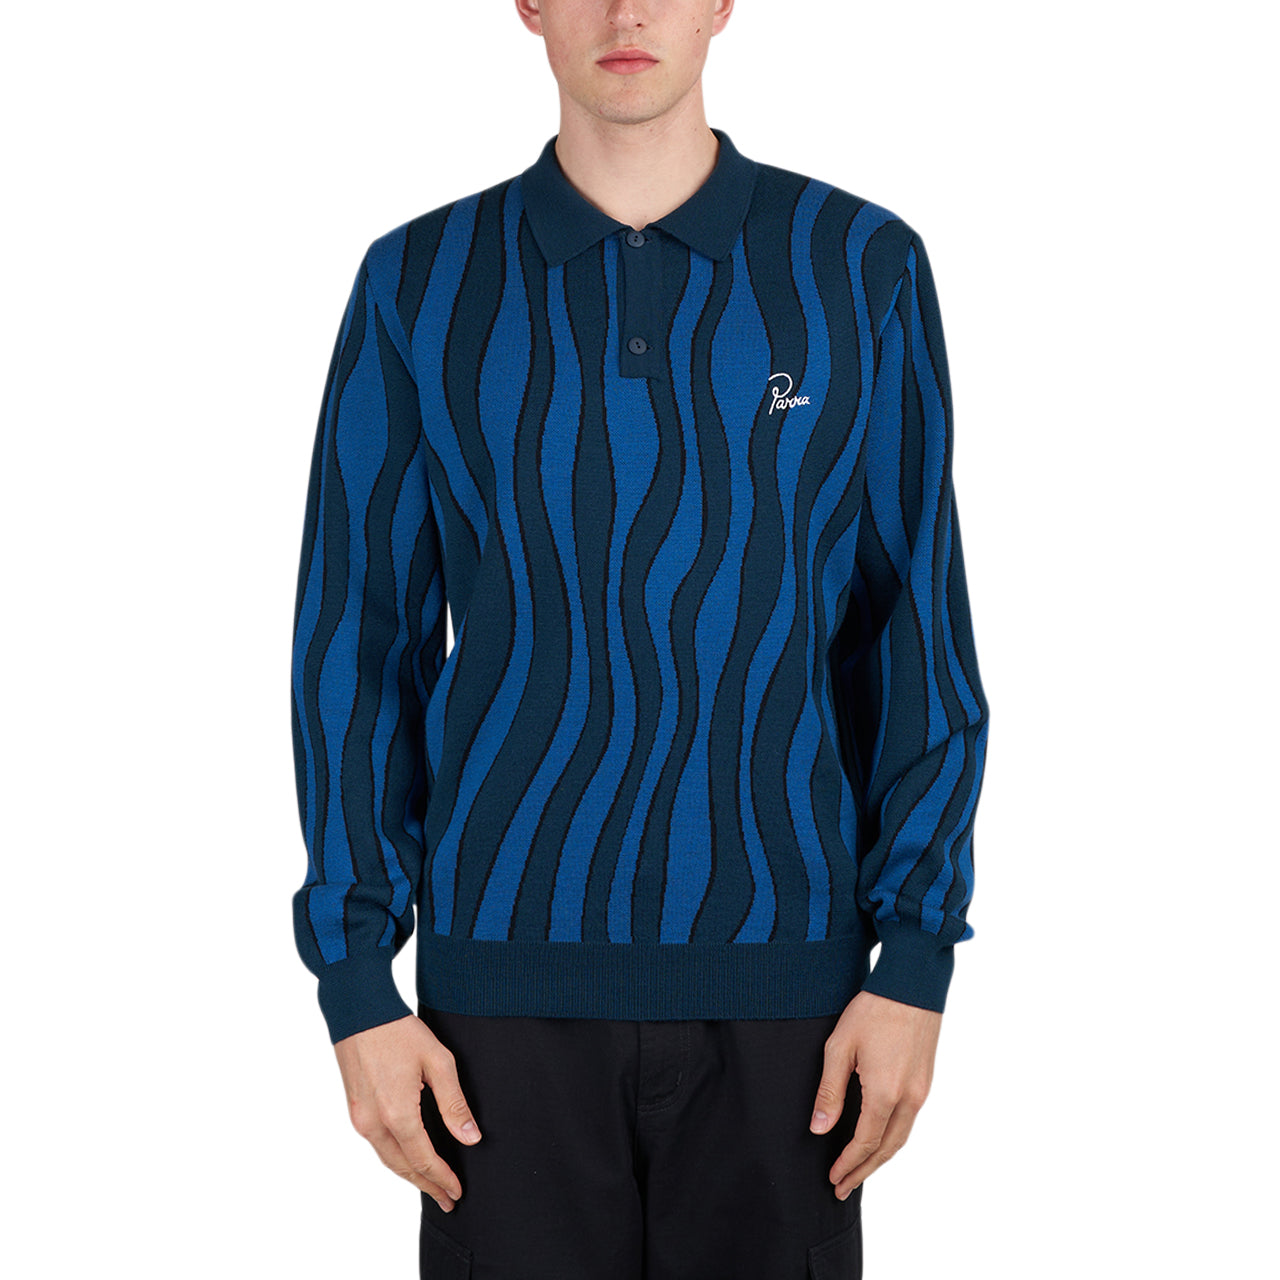 Parra Aqua Weed Waves Knitted Polo Shirt (Multi) 49230 - Allike Store